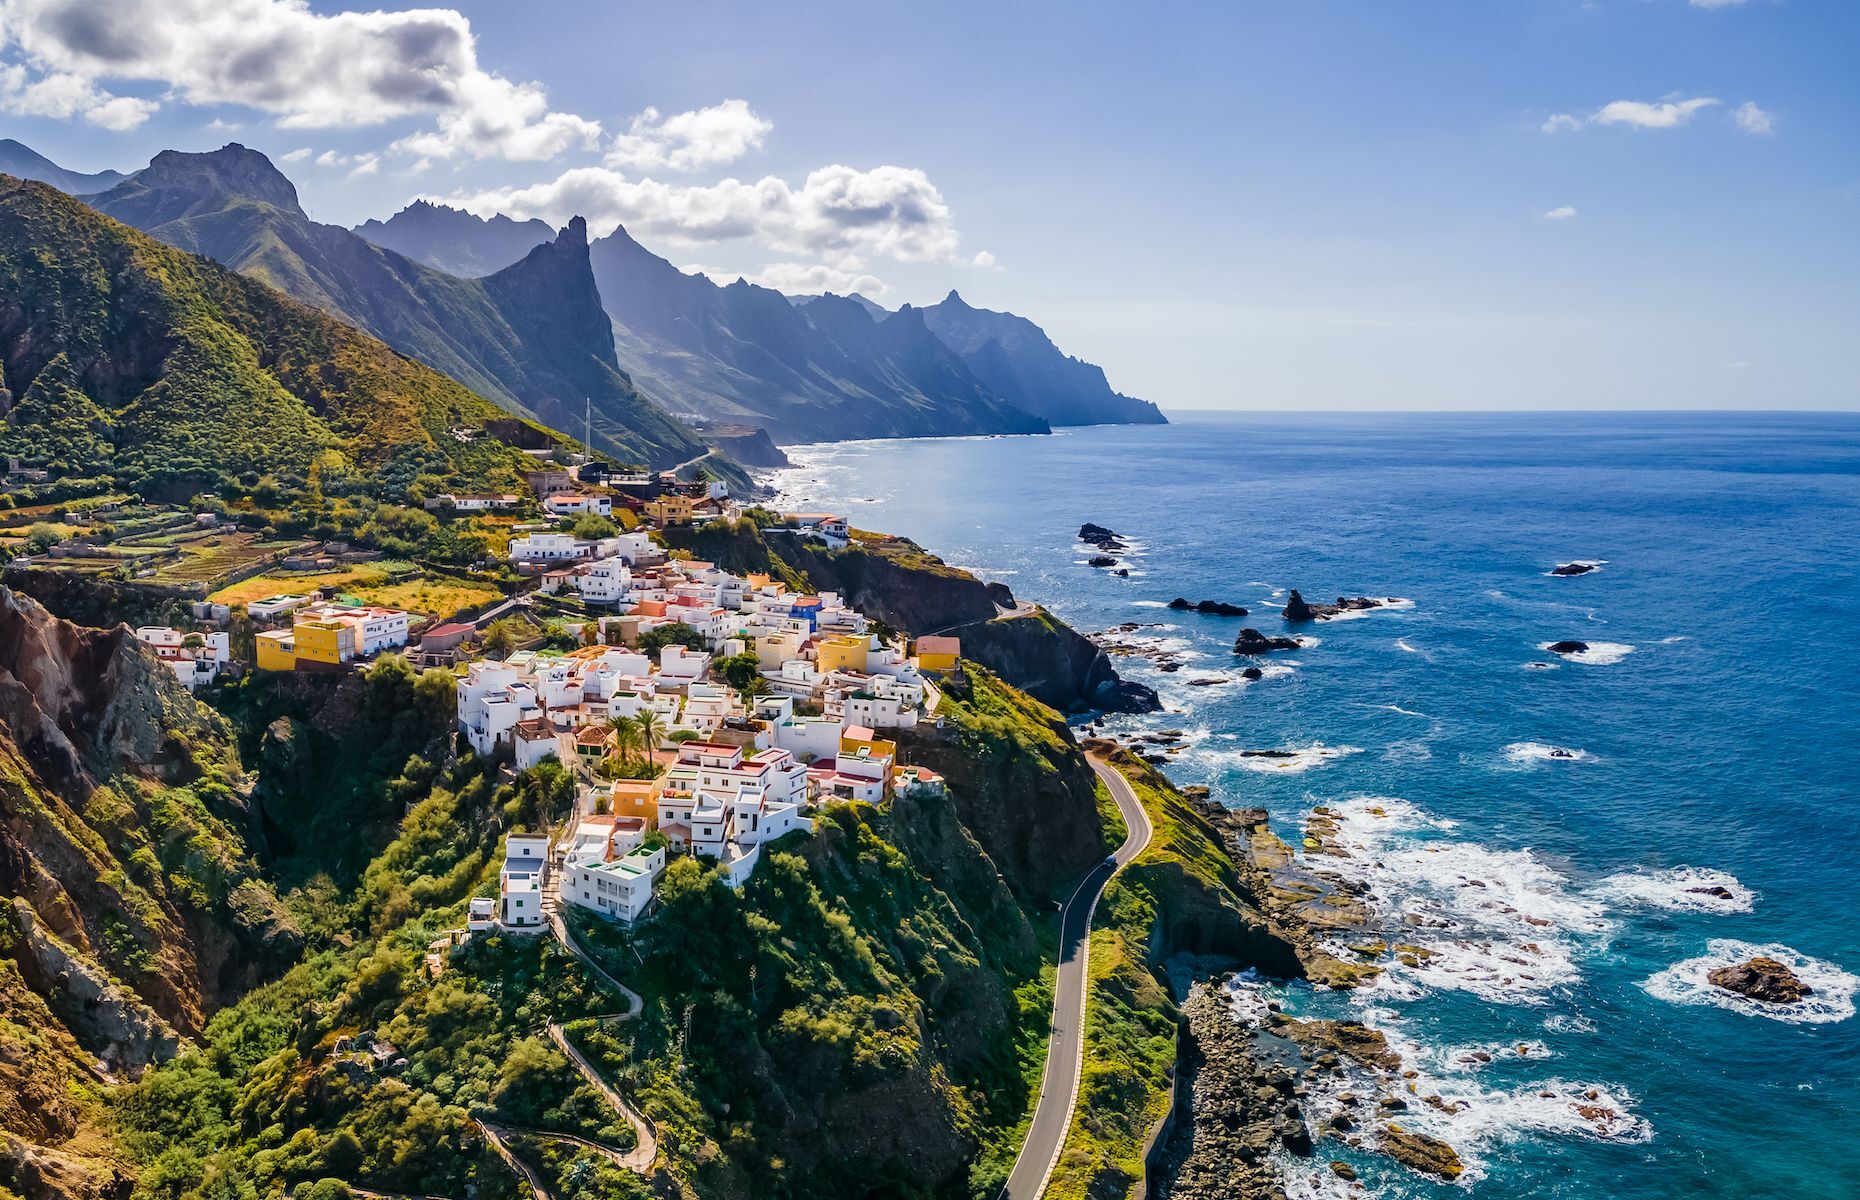 <p>Located off the West African coast, the beloved <a href="https://www.hellocanaryislands.com/tenerife/" class="CMY_Link CMY_Valid" rel="noreferrer noopener">Tenerife</a> is the largest island in the Canary archipelago. In addition to charming villages and bucolic landscapes, Tenerife is also home to the imposing <a href="https://www.spain.info/en/nature/teide-national-park/" class="CMY_Link CMY_Valid" rel="noreferrer noopener">Teide volcano</a>, the highest mountain in Spain. Travellers visiting before Lent can also join in Santa Cruz Carnival festivities.</p>